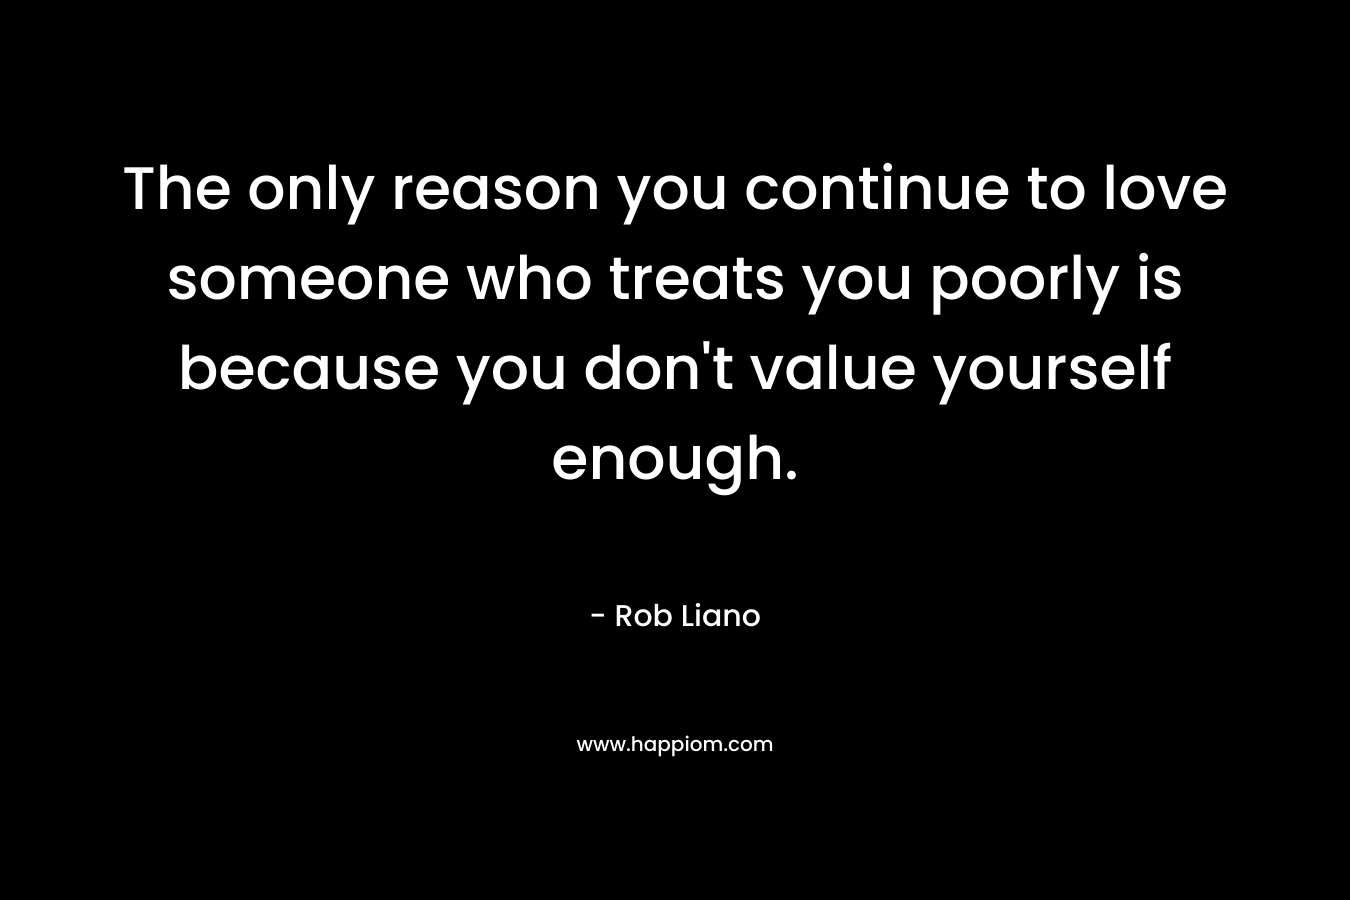 The only reason you continue to love someone who treats you poorly is because you don't value yourself enough.